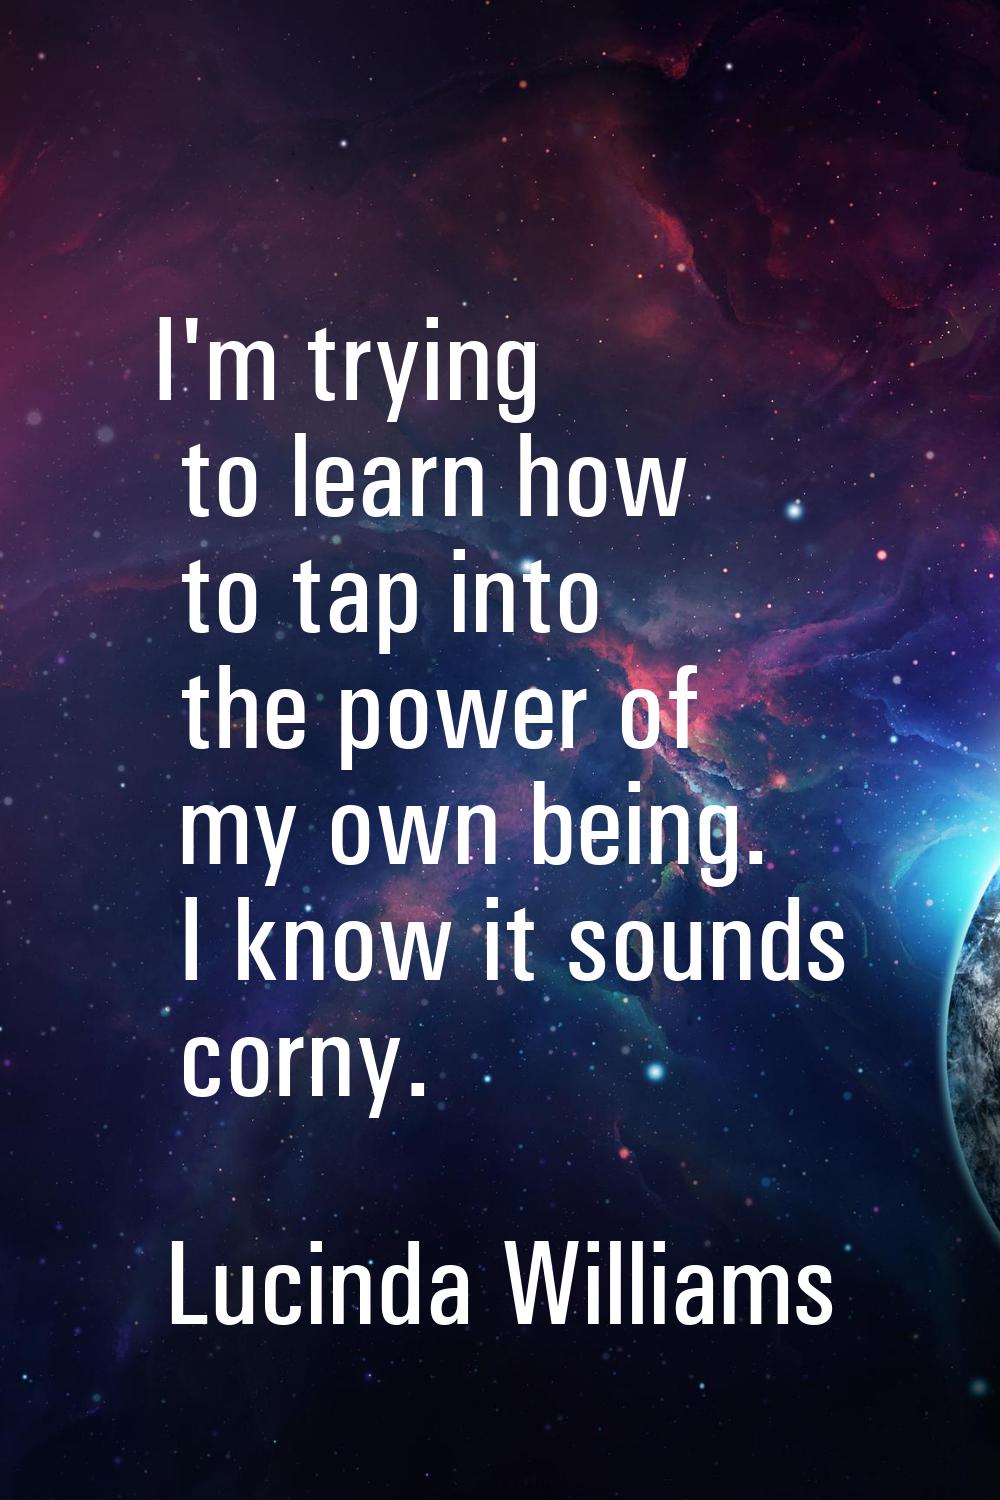 I'm trying to learn how to tap into the power of my own being. I know it sounds corny.